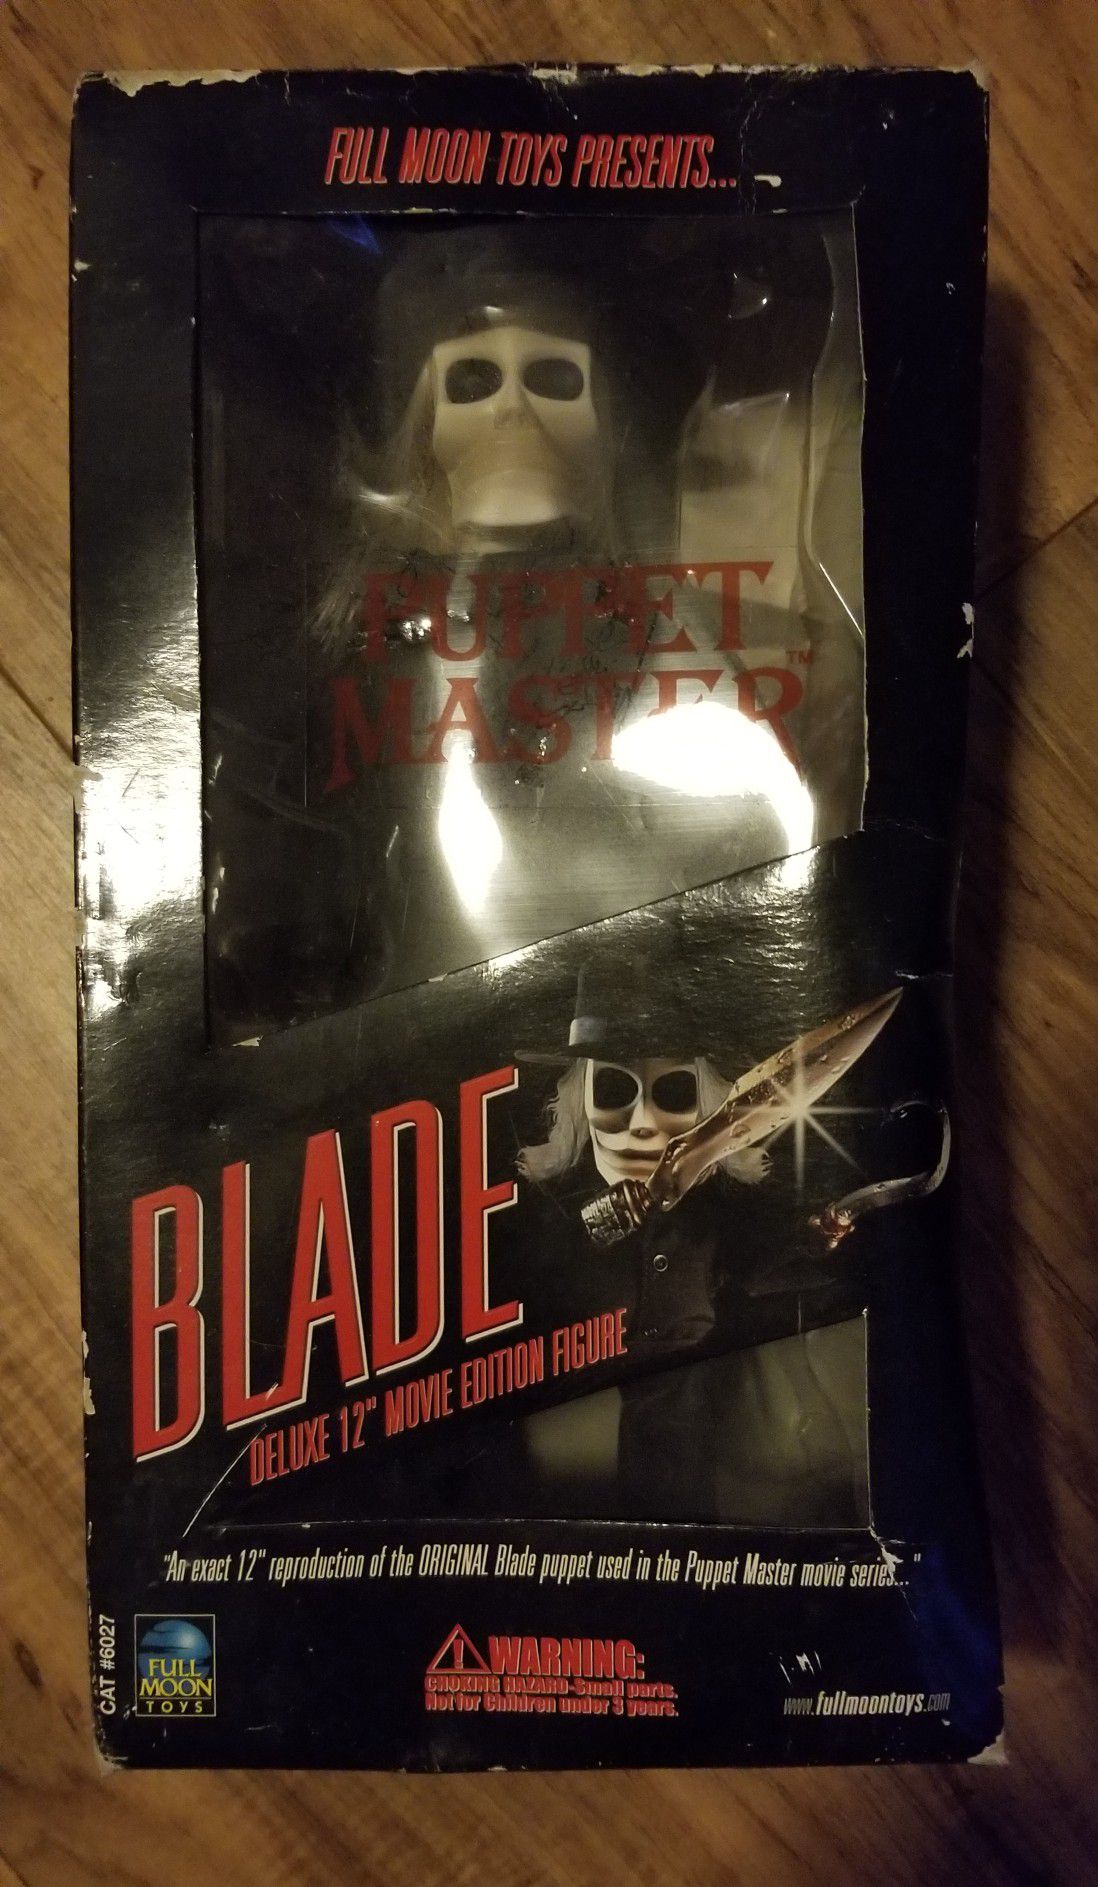 PUPPET MASTER " Blade" deluxe 12" inch movie figurine w/ full DVD collection